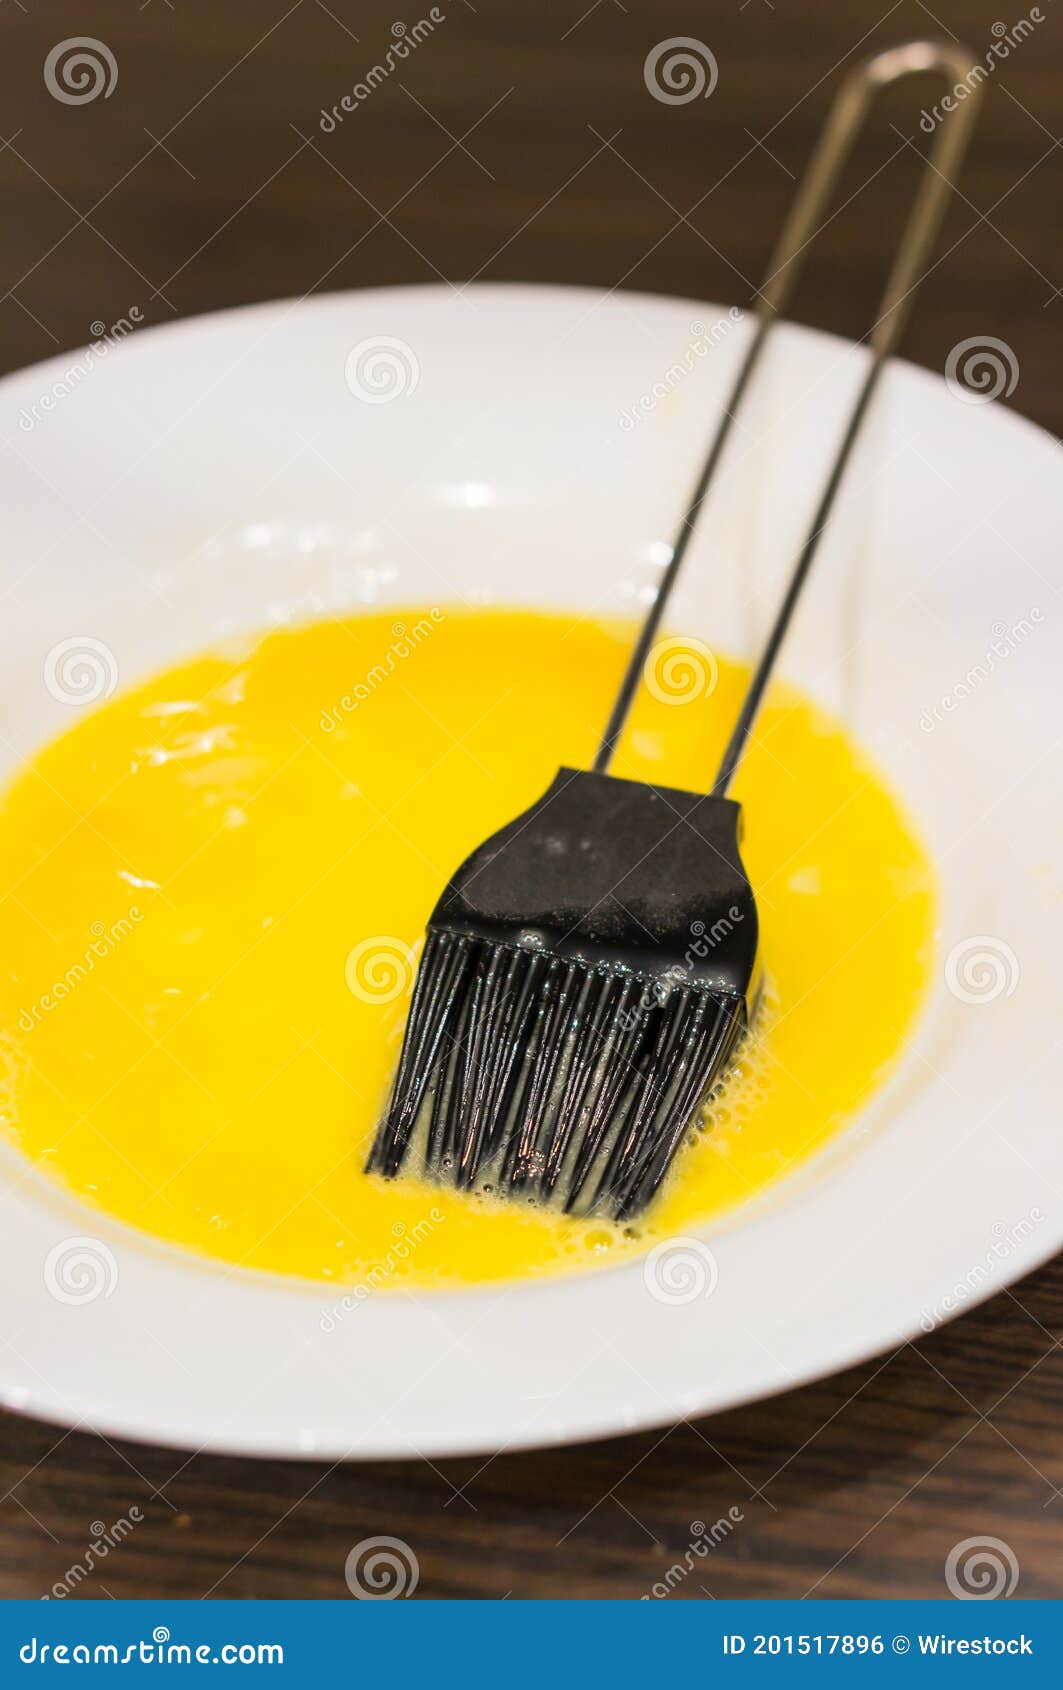 Vertical Shot of an Egg Wash in a Plate with Black Pastry Brush